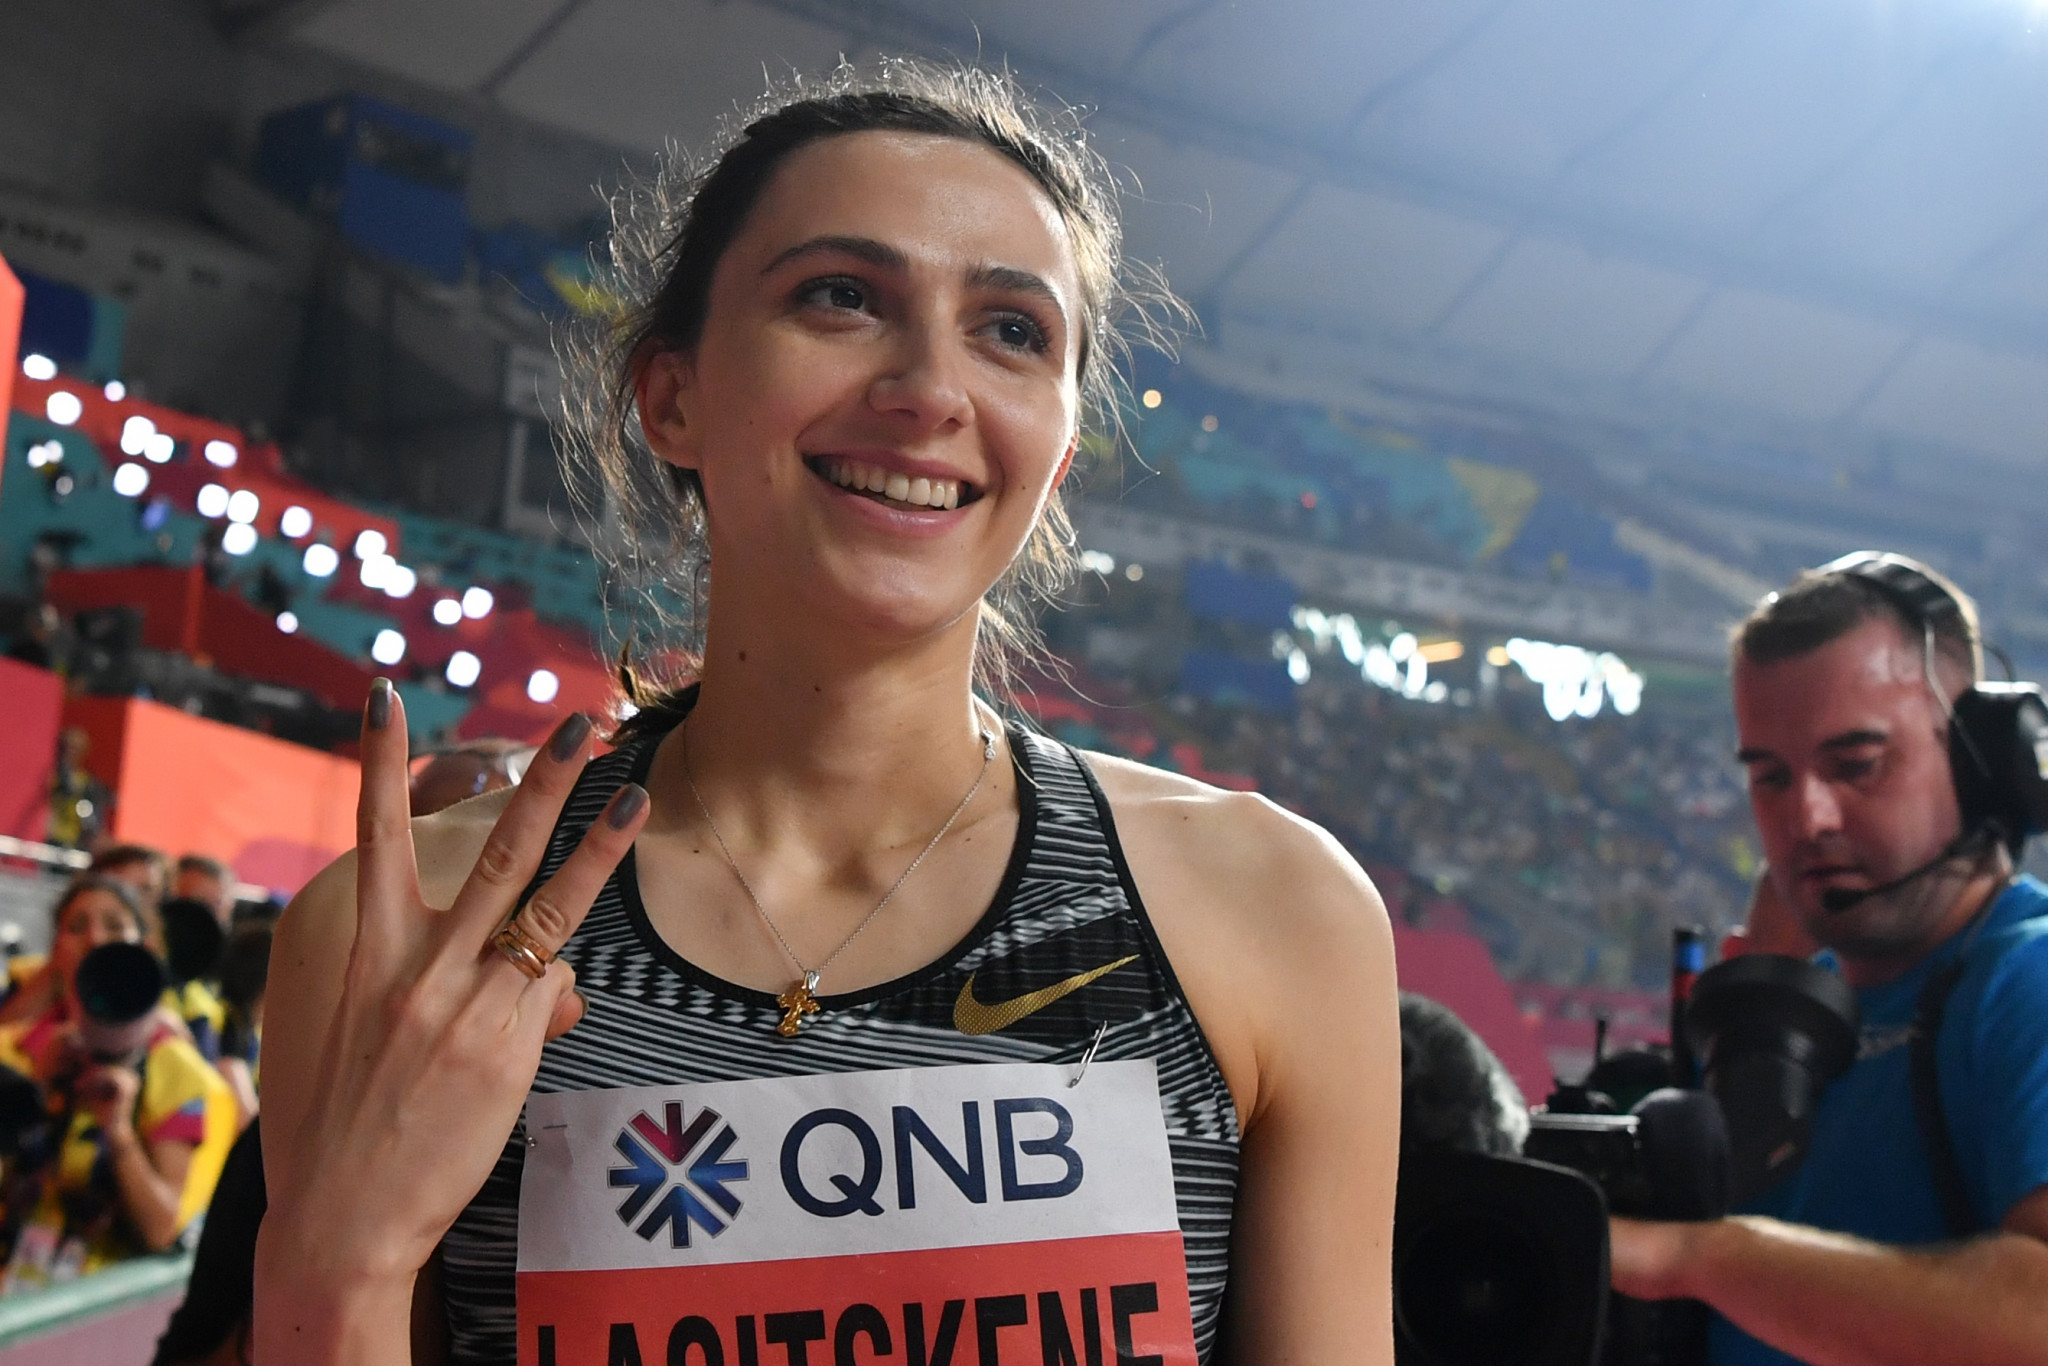 Three-time high jump world champion Maria Lasitskene is among 10 athletes approved to compete as neutrals at Tokyo 2020 by RusAf ©Getty Images